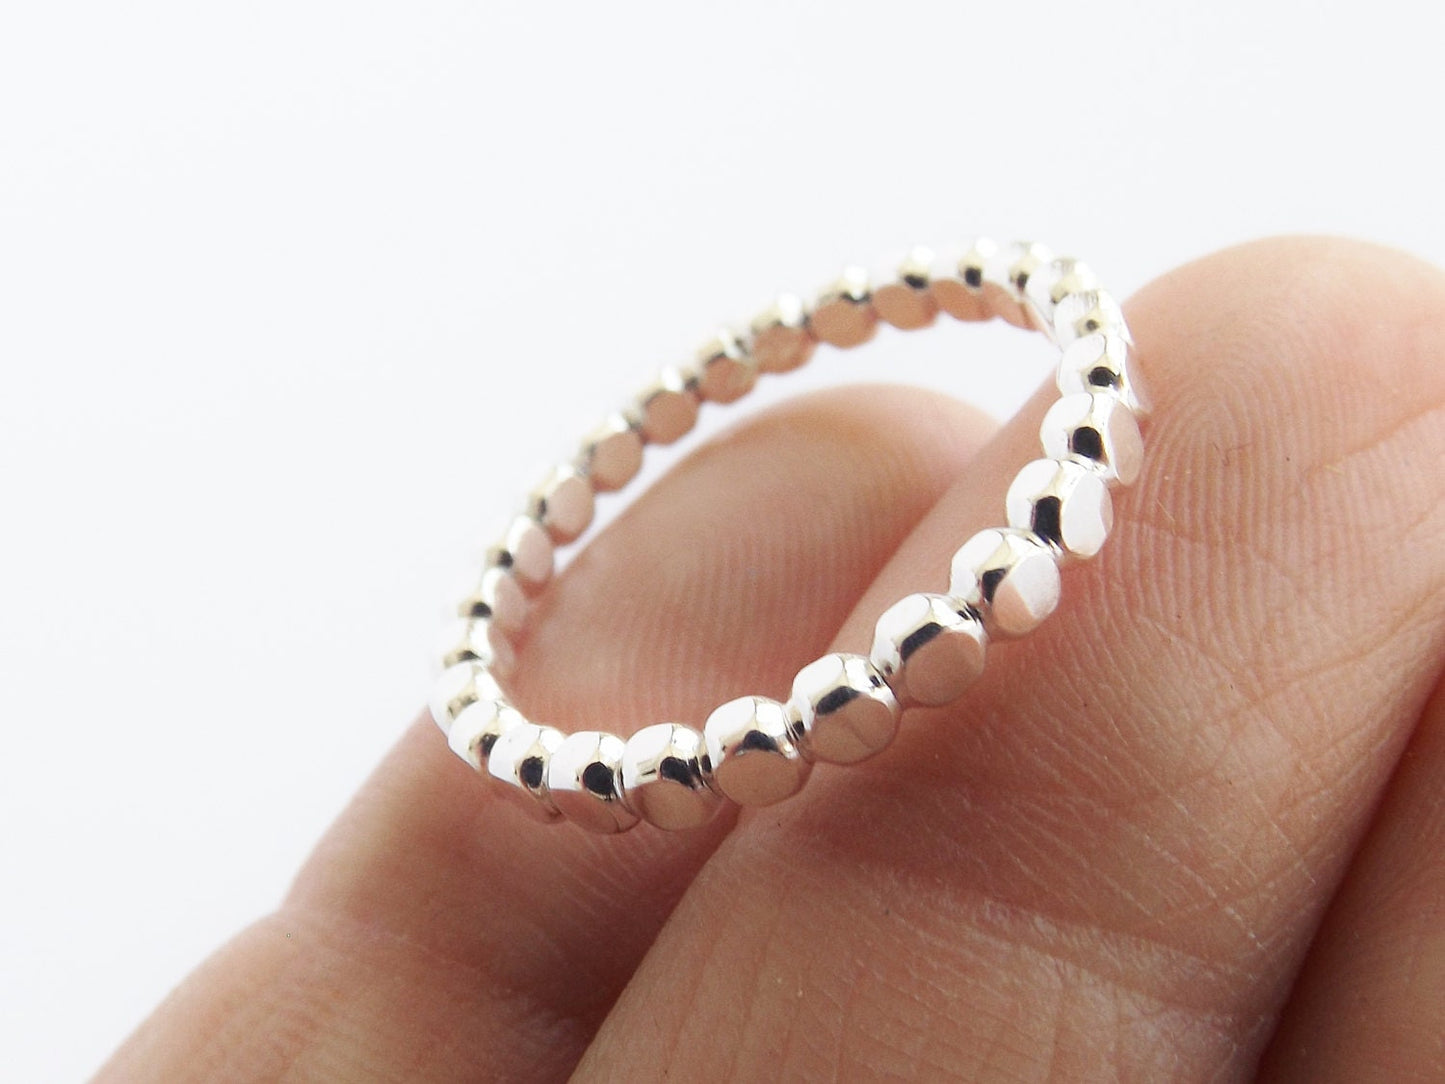 Thick Modern Design Thumb Ring,Sterling Drop Bead Thumb Ring,Stacking Ring,Modern Boho Rng,Drop Ring,Super Thick Beaded Ring,Statement